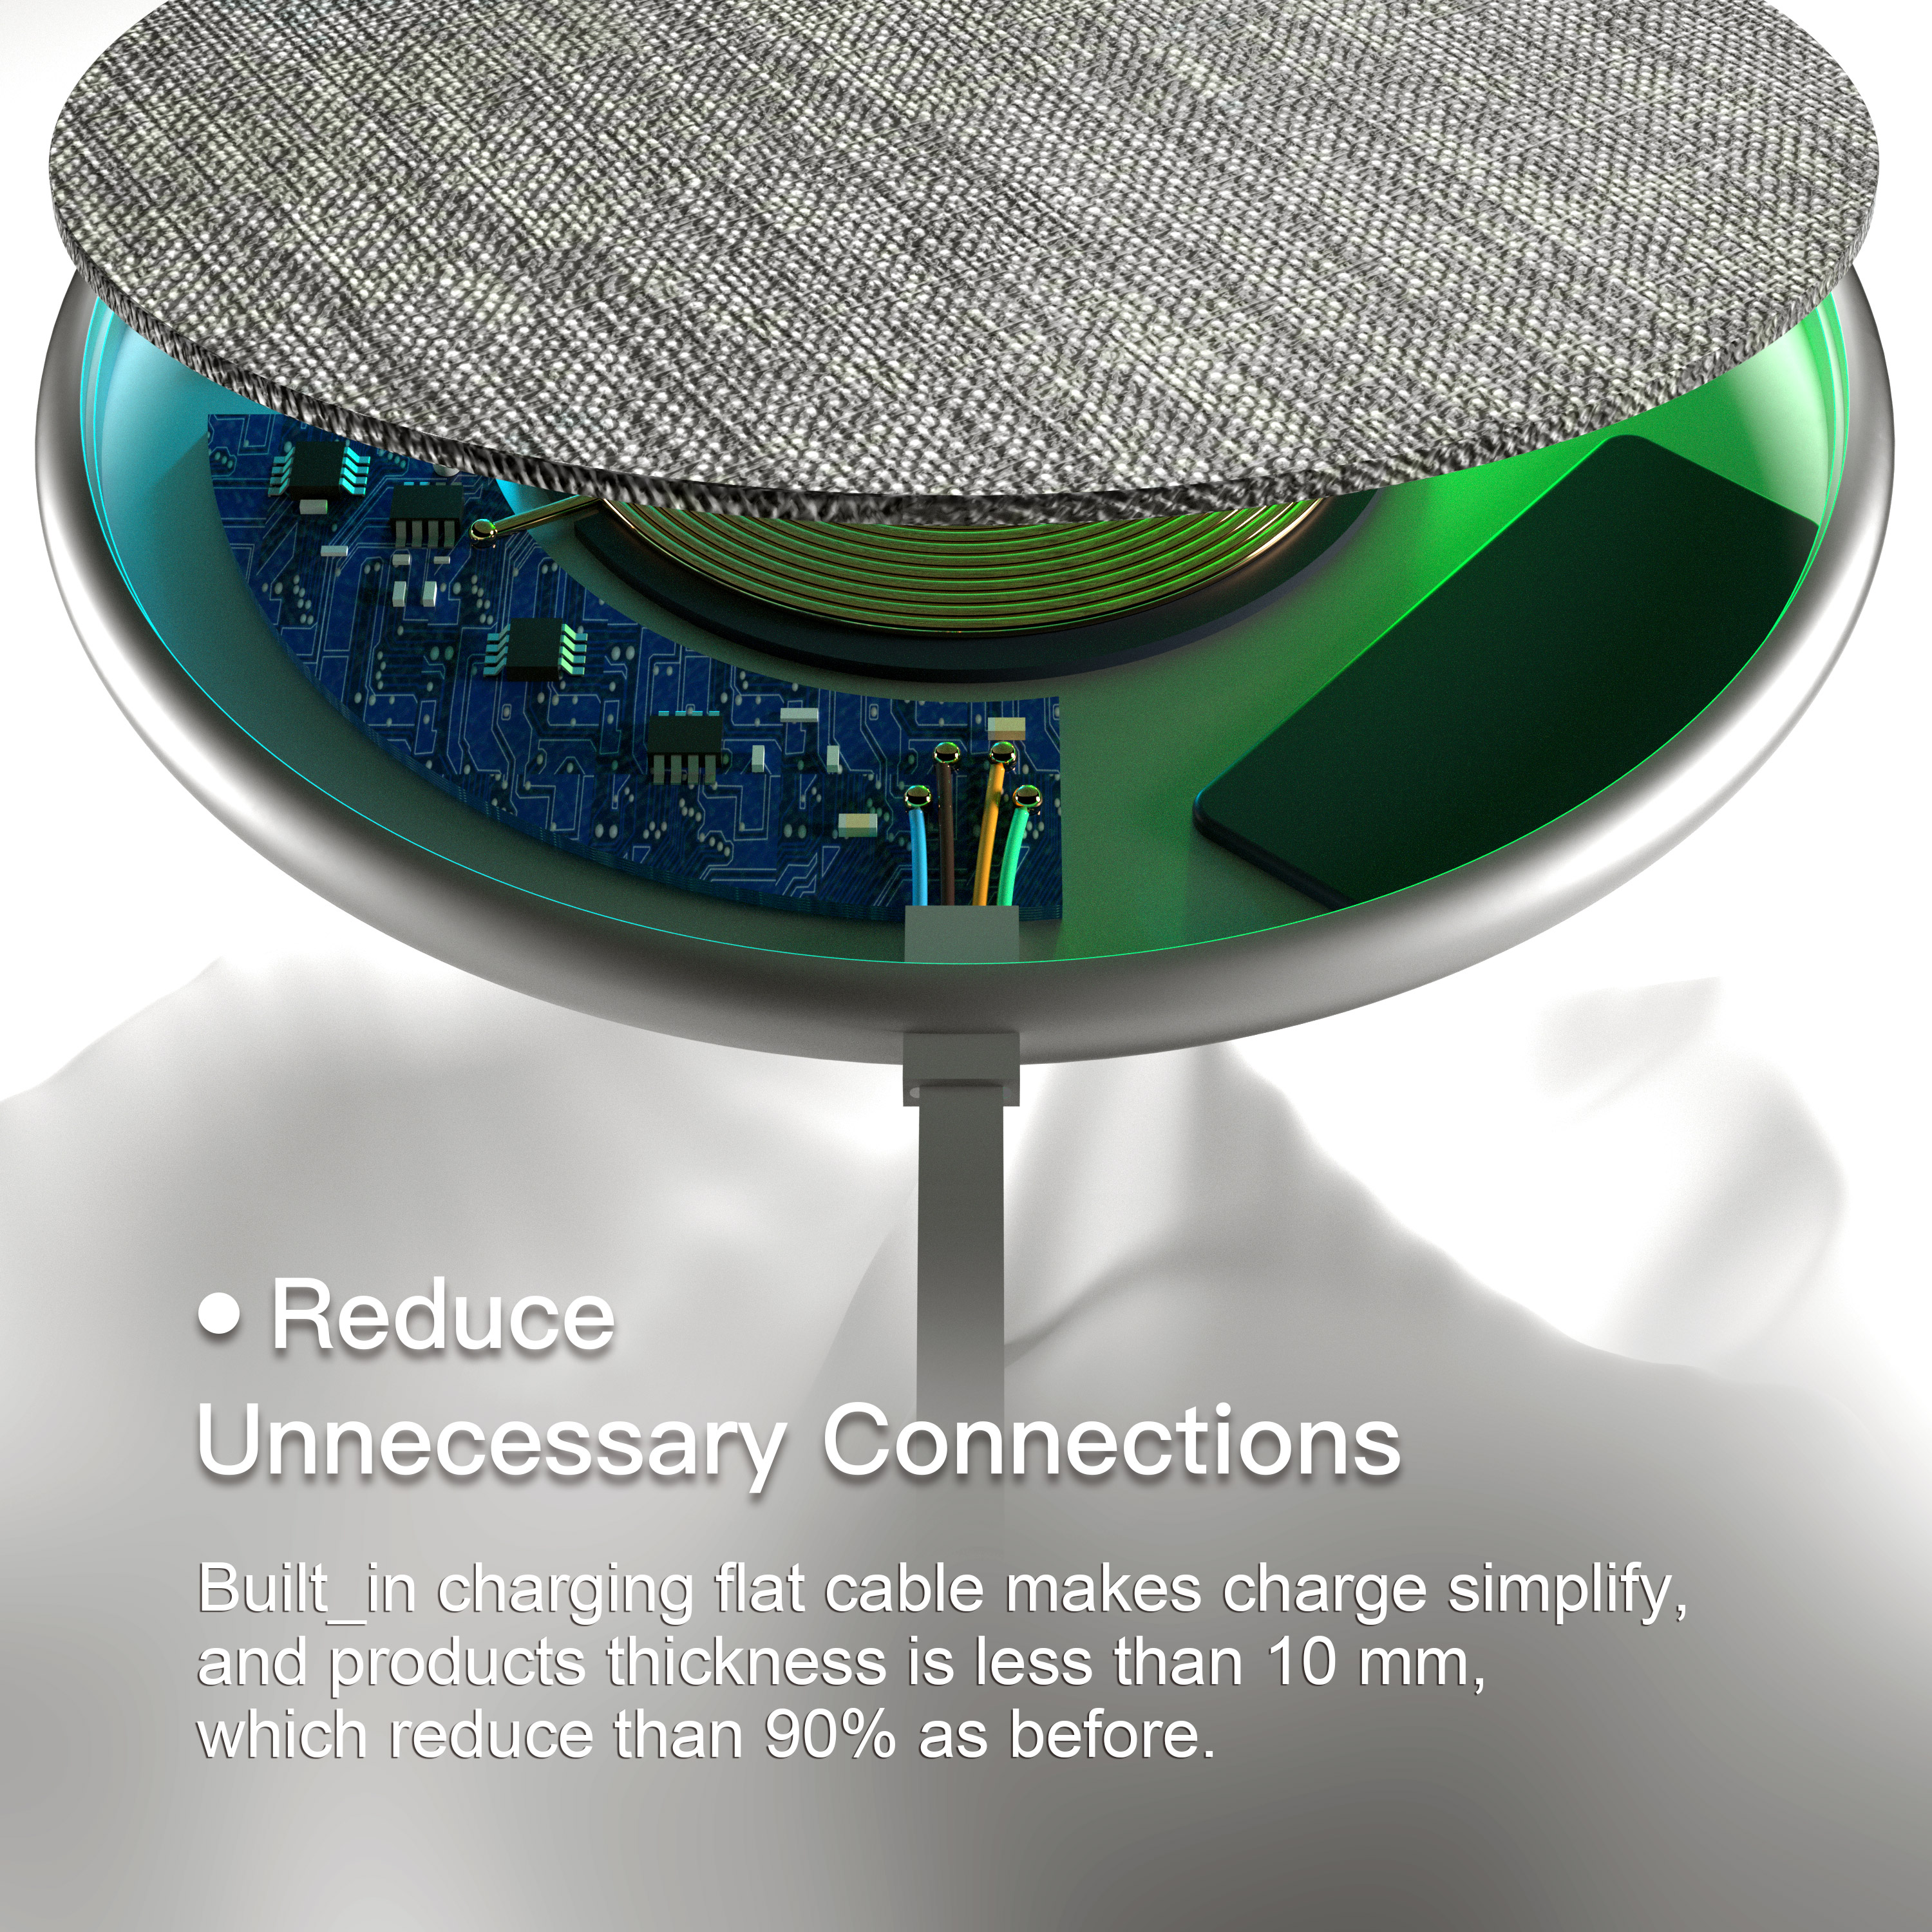 What are the advantages of MIMAN as a wireless phone charger manufacturer?